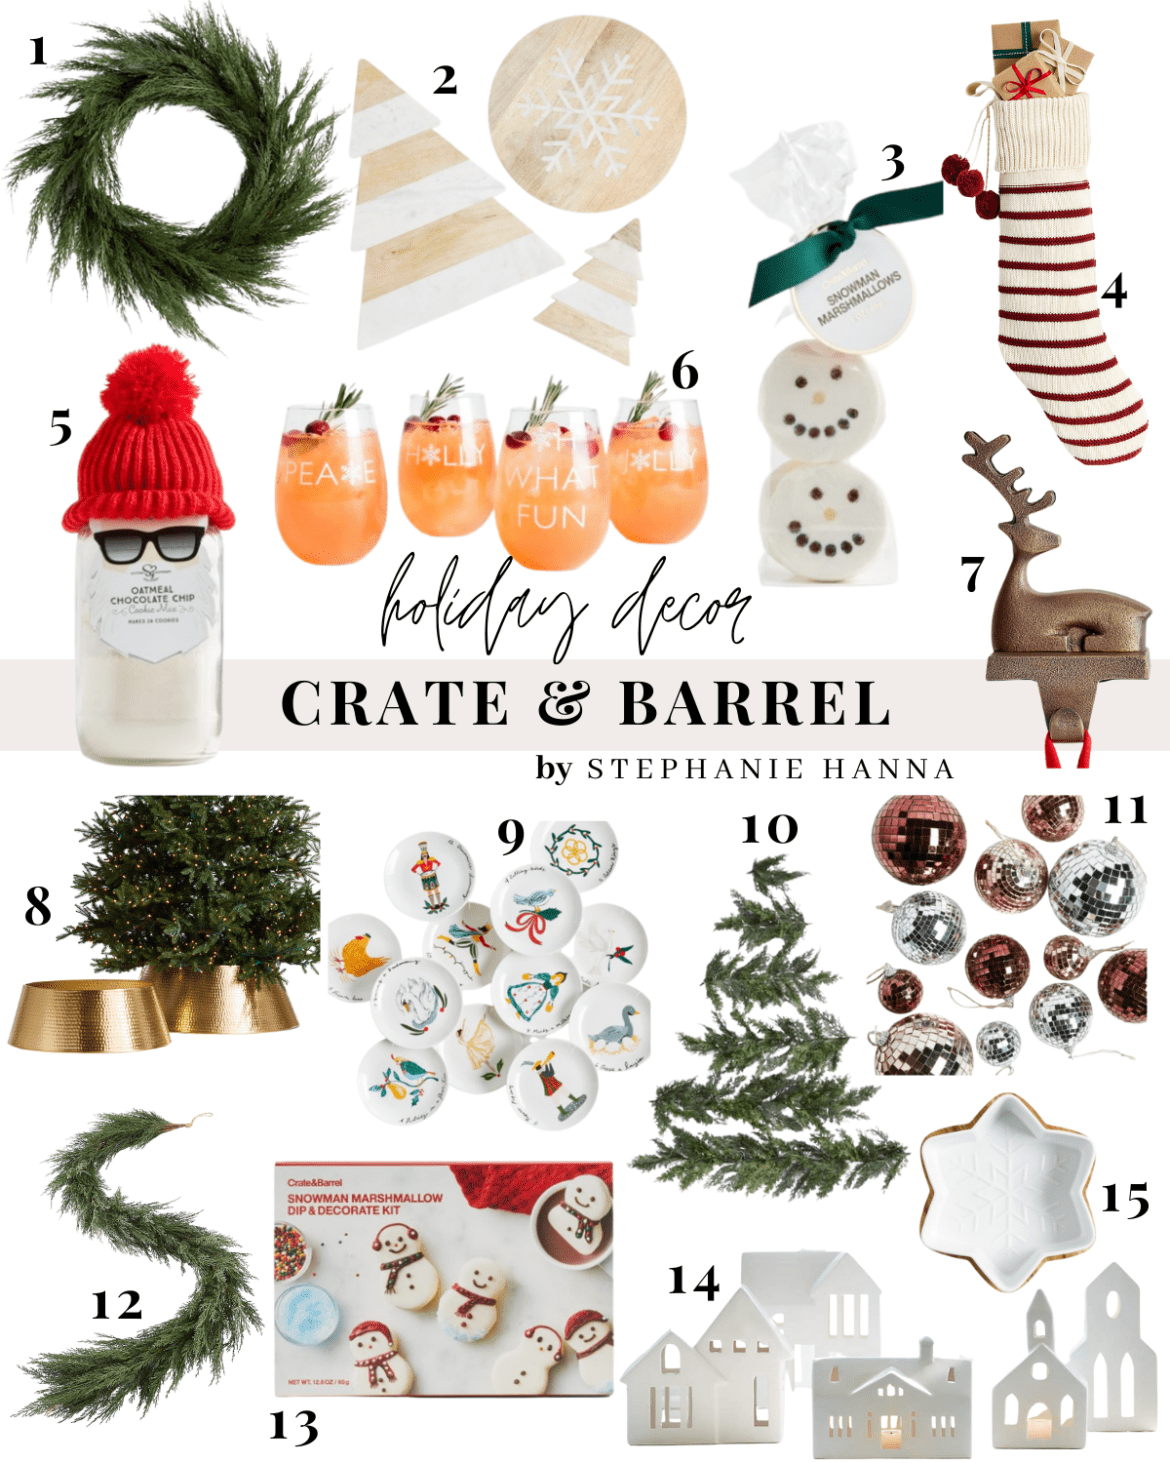 CRATE AND BARREL HOLIDAY DECOR